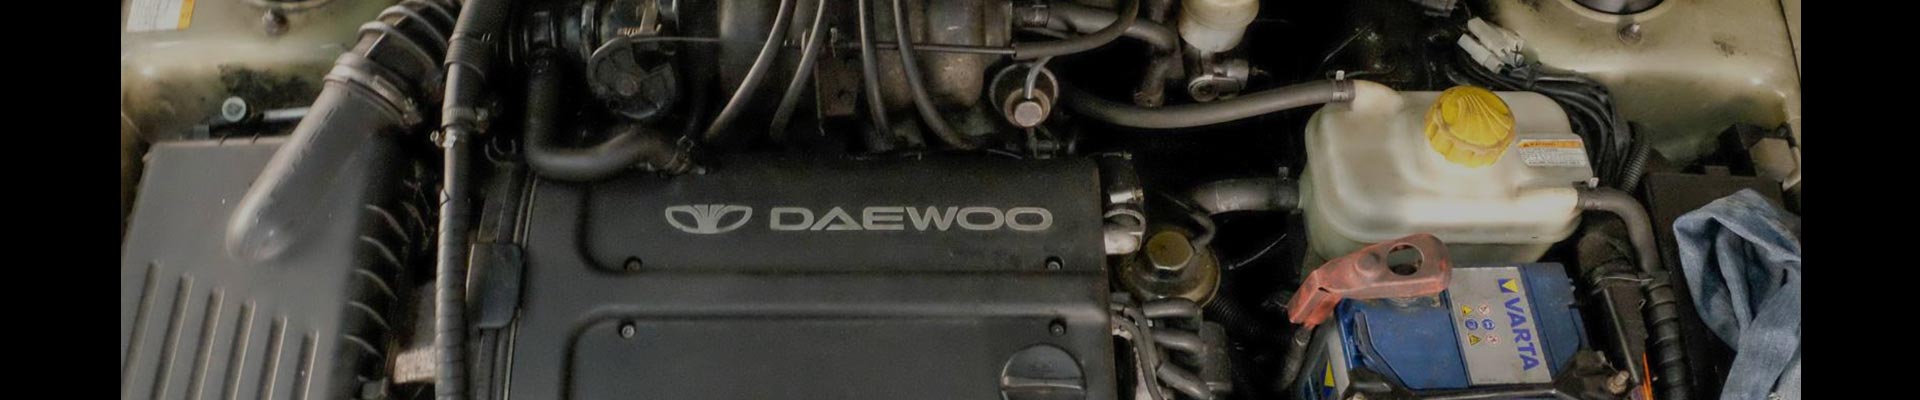 Shop Replacement Daewoo Nubira Parts with Discounted Price on the Net